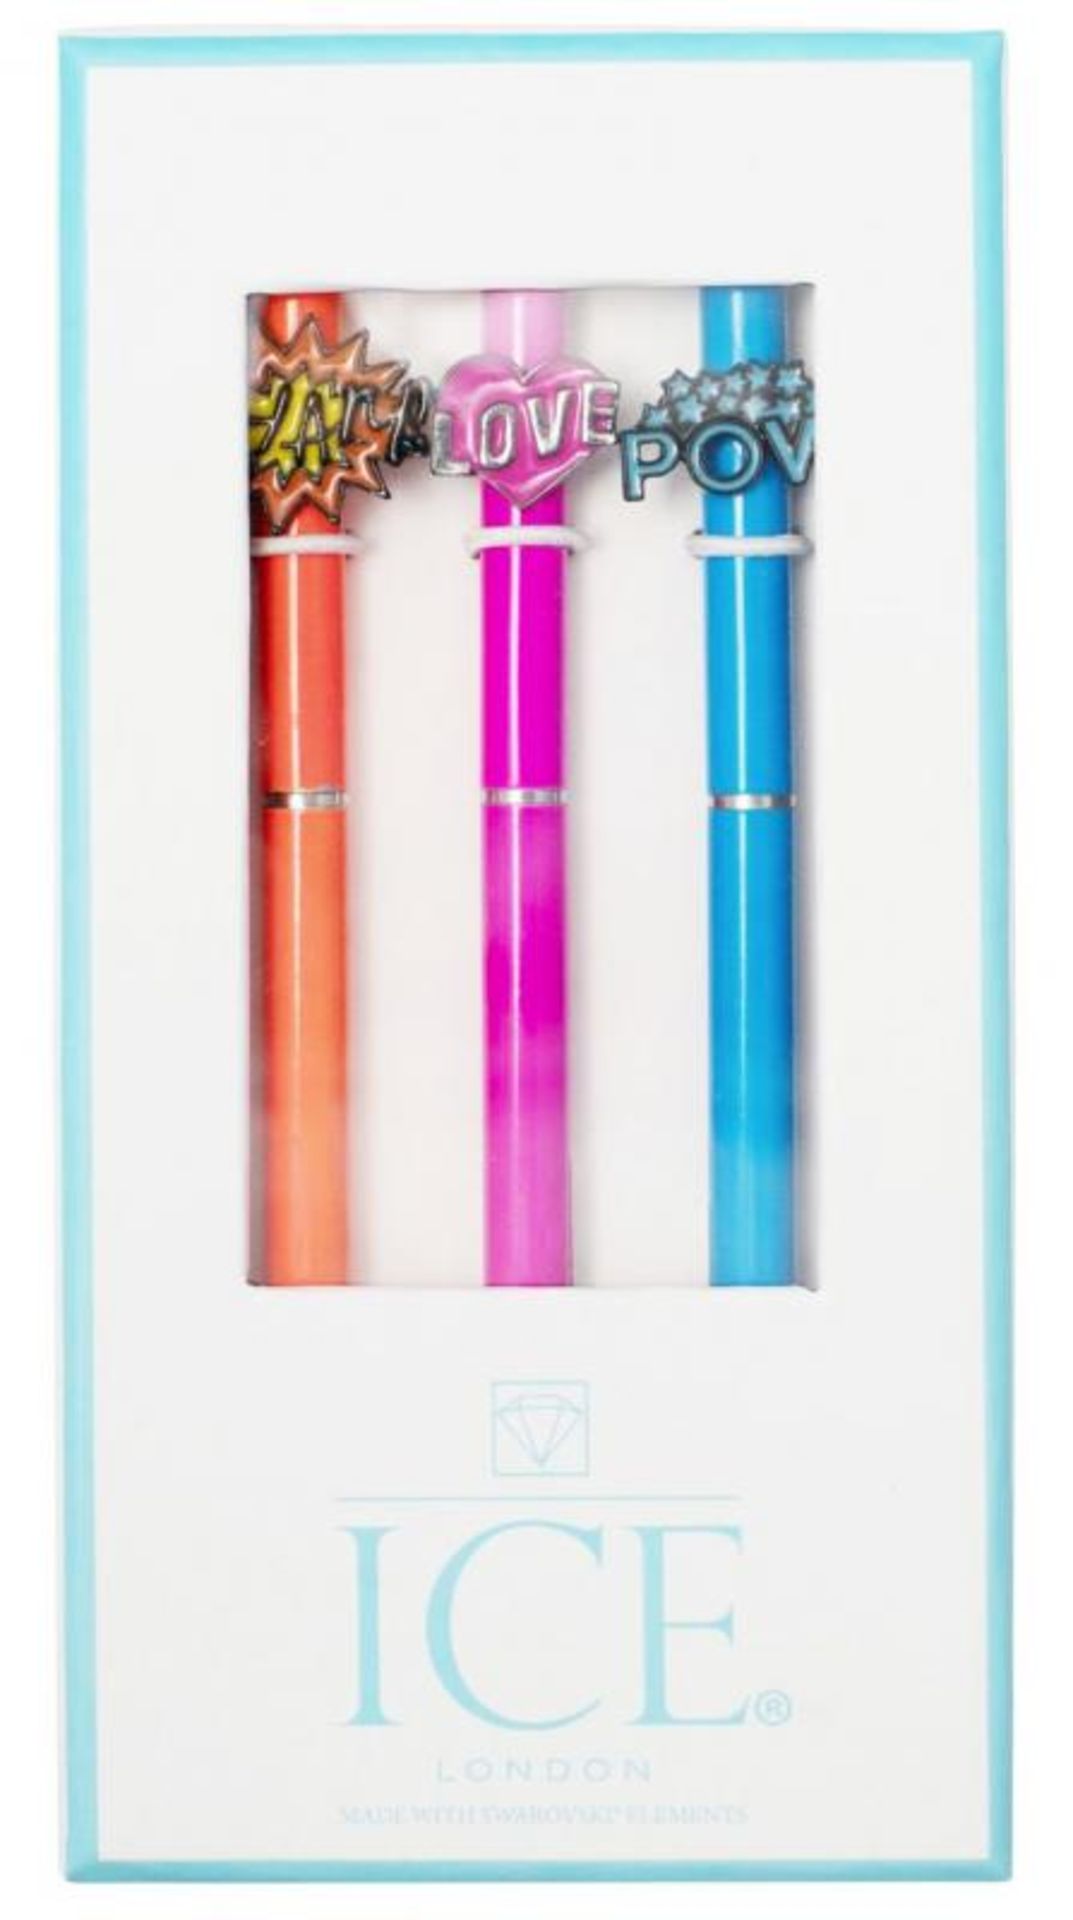 20 x ICE London 'Pop Art' Pen Sets - Brand New Sealed Stock - Ideal Gifts - Image 2 of 2